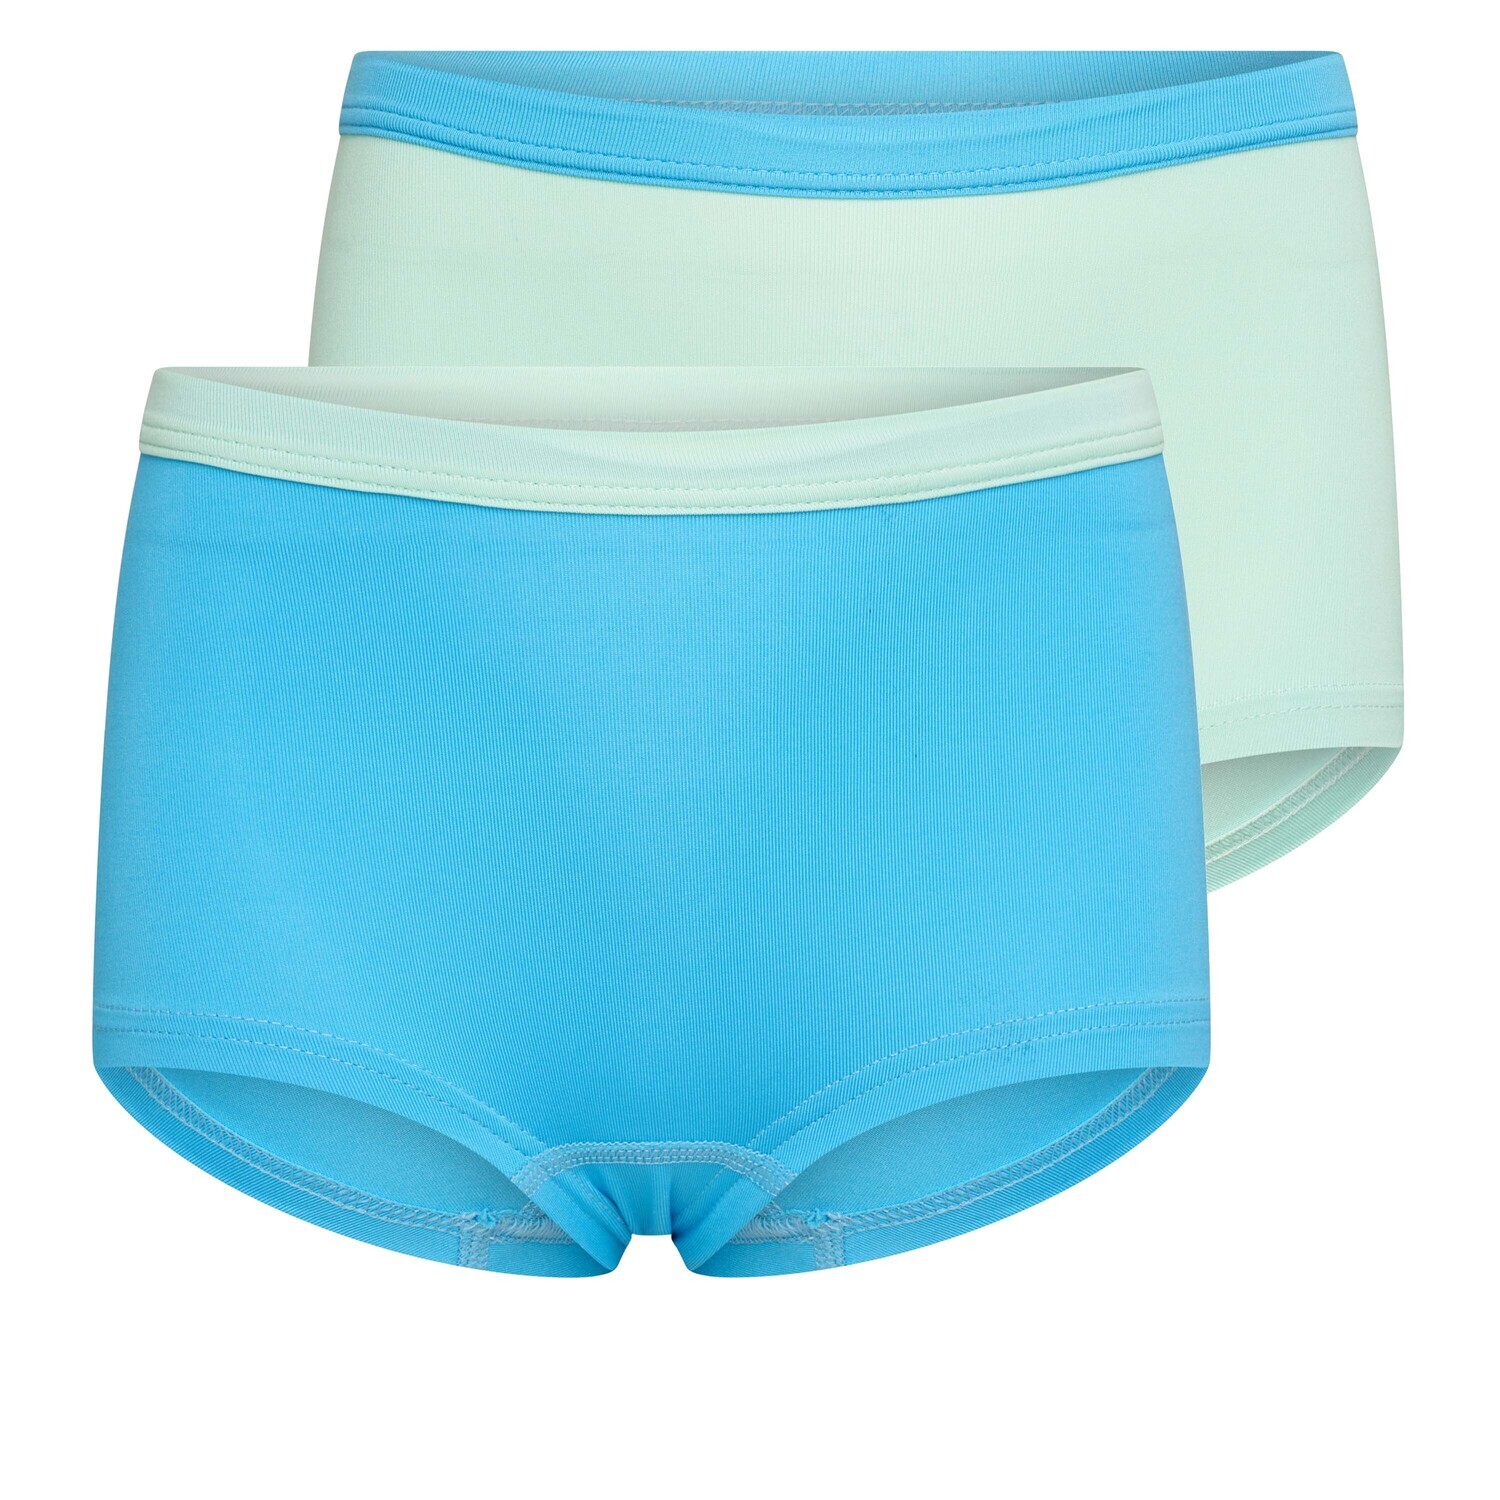 (21-171) Meisjes boxershort Mix and Match 2-Pack turquoise/mint 146/152